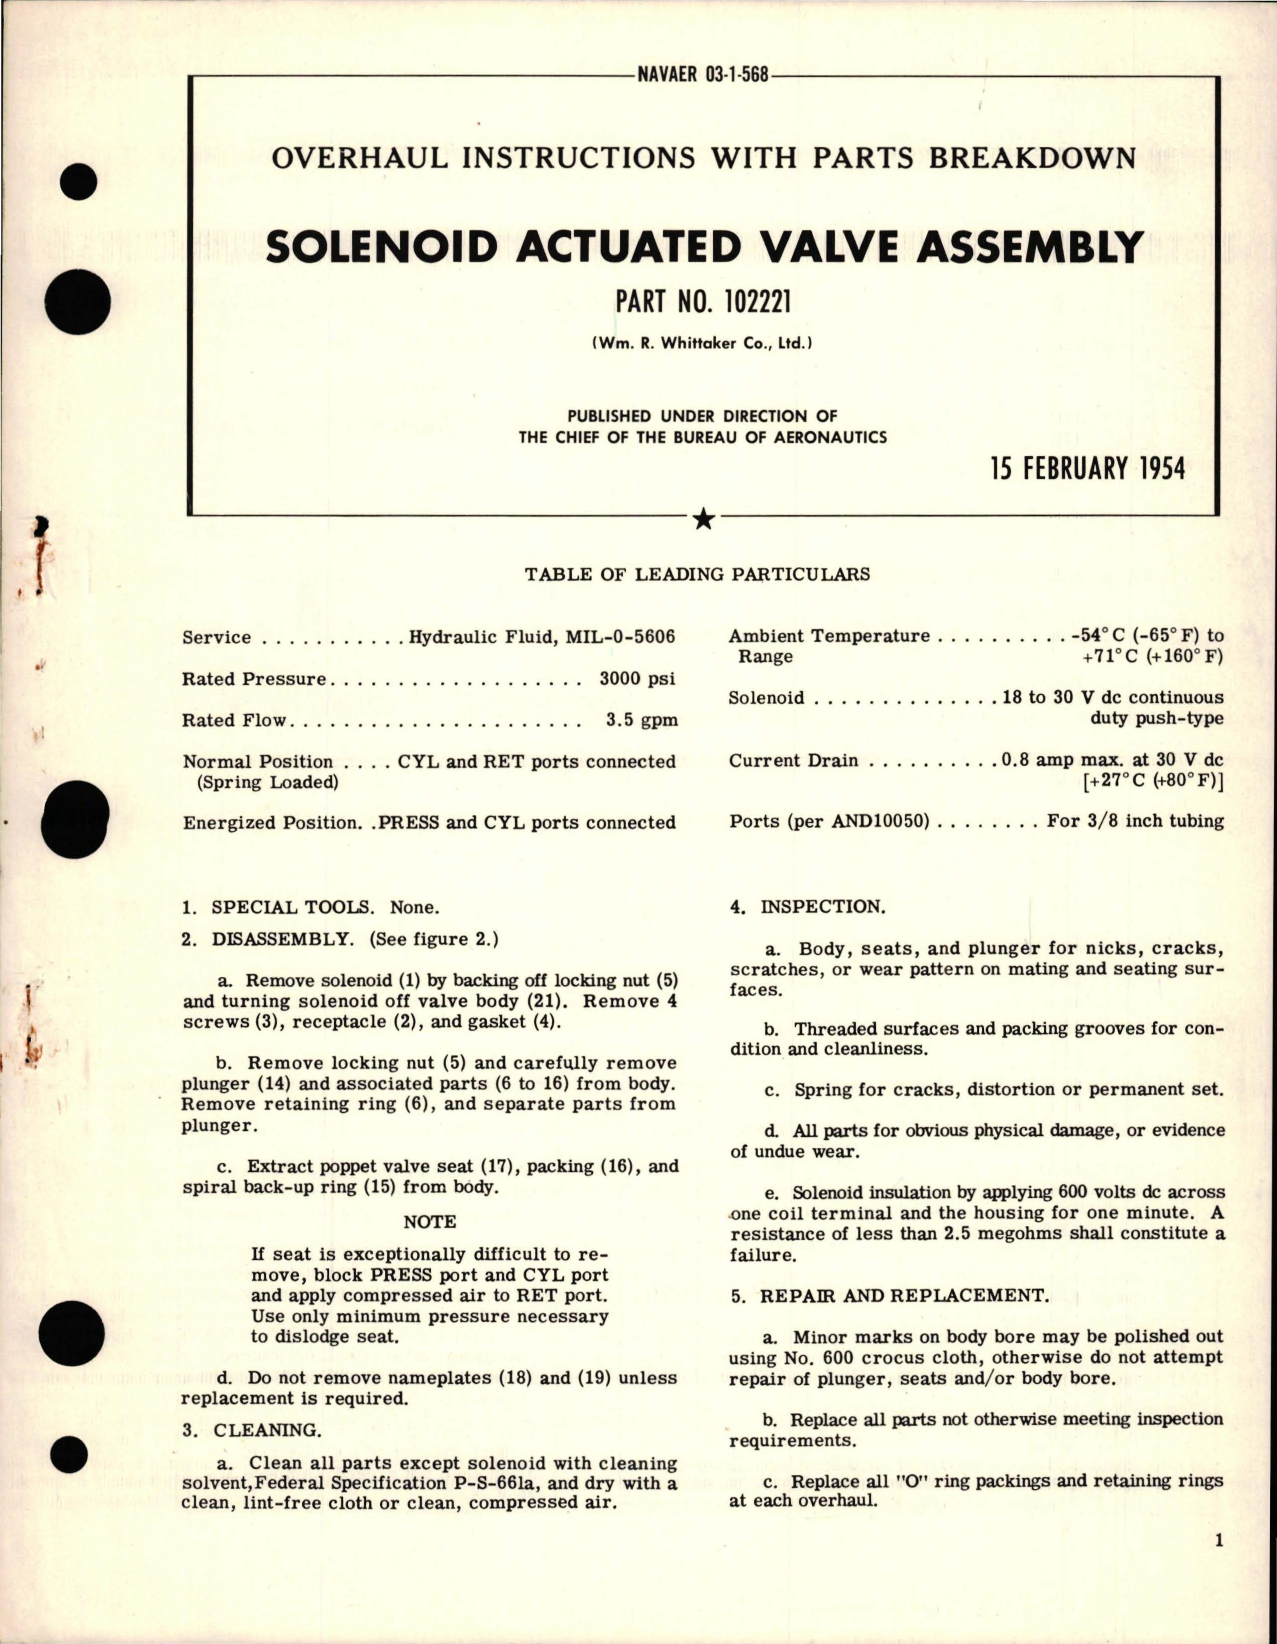 Sample page 1 from AirCorps Library document: Overhaul Instructions with Parts Breakdown for Solenoid Actuated Valve Assembly - Part 102221